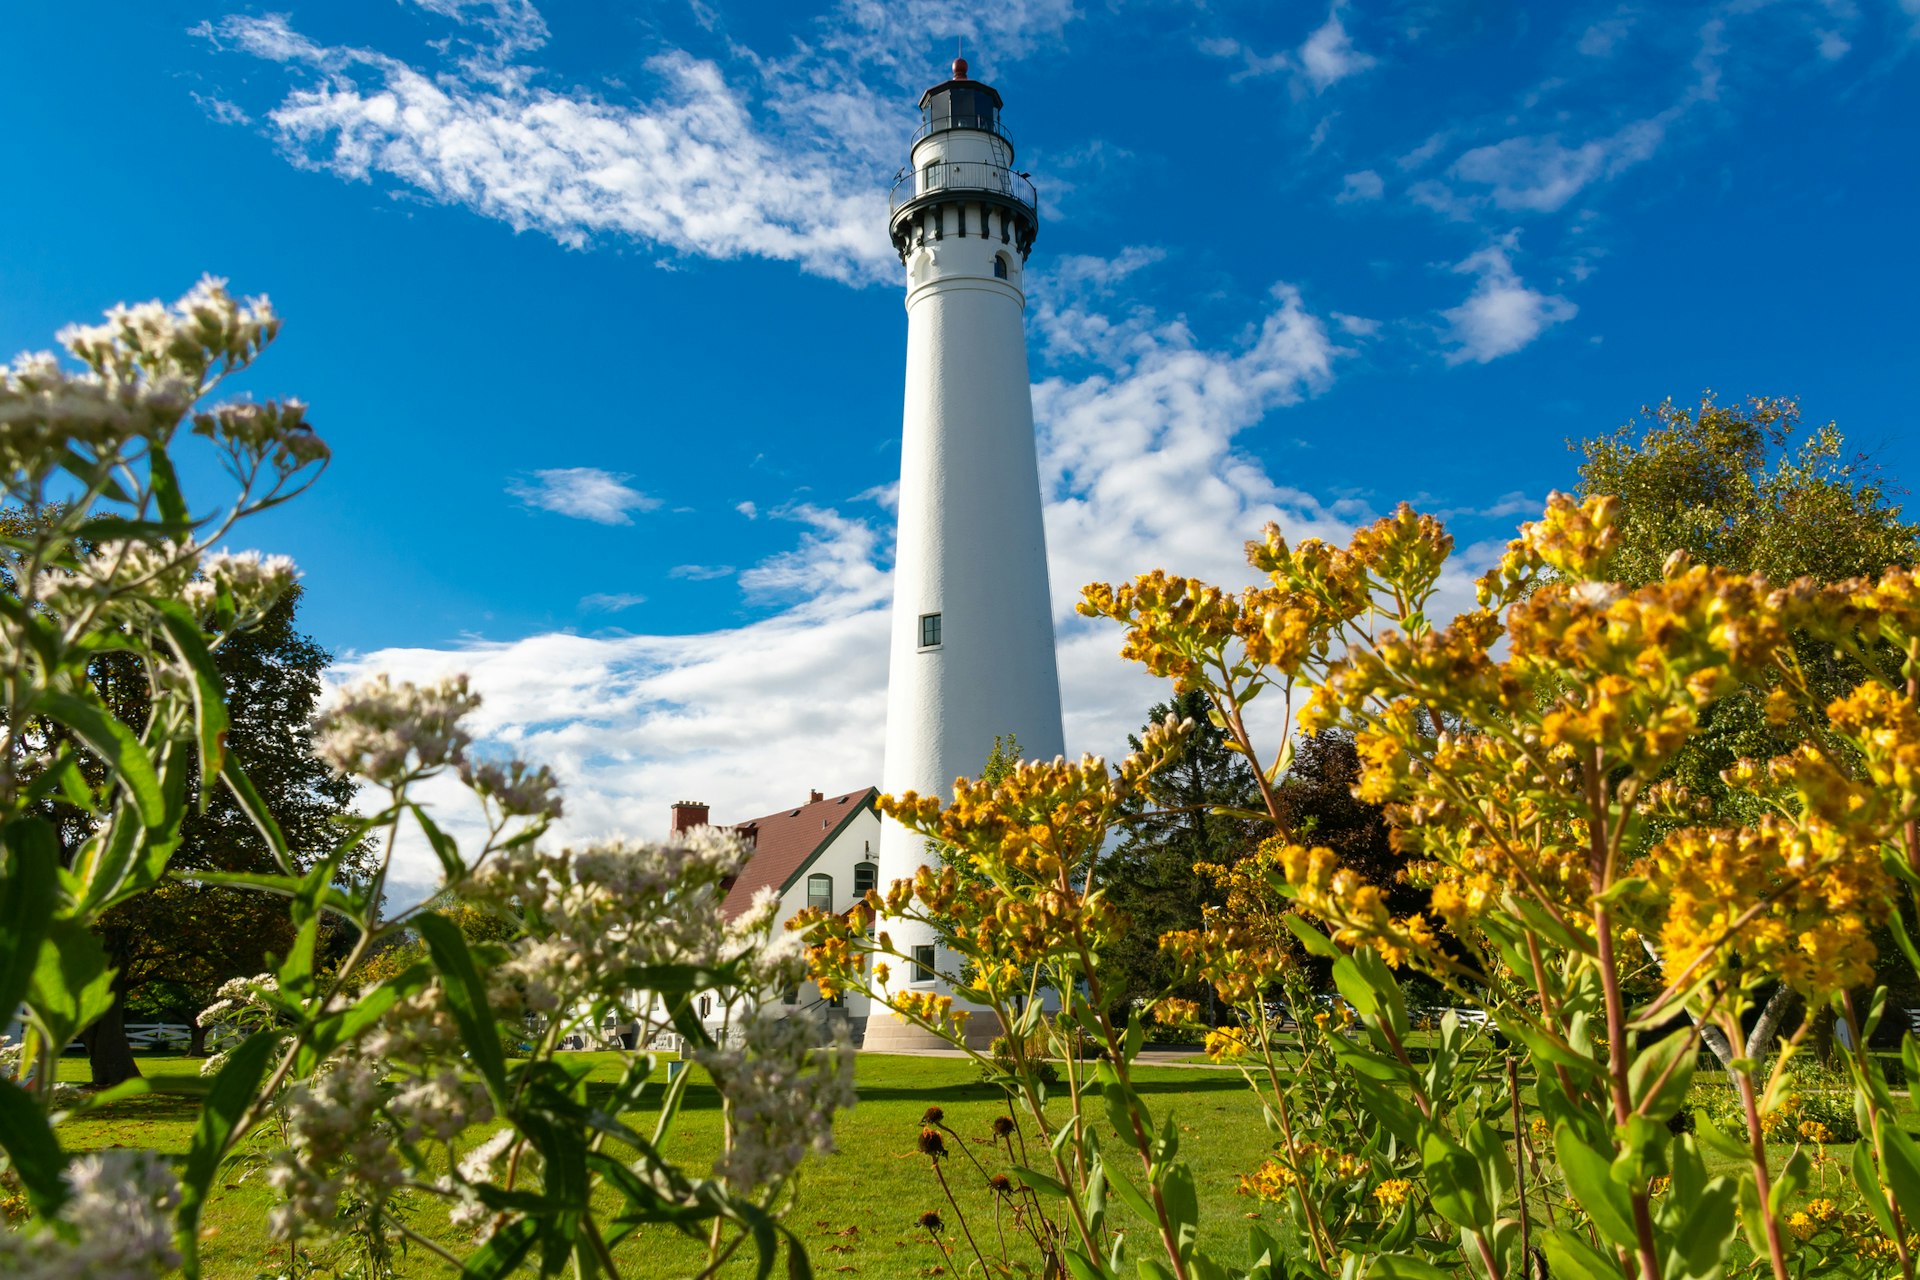 The whitewashed Wind Point Lighthouse heads towards a bright blue sky with some foliage in the foreground